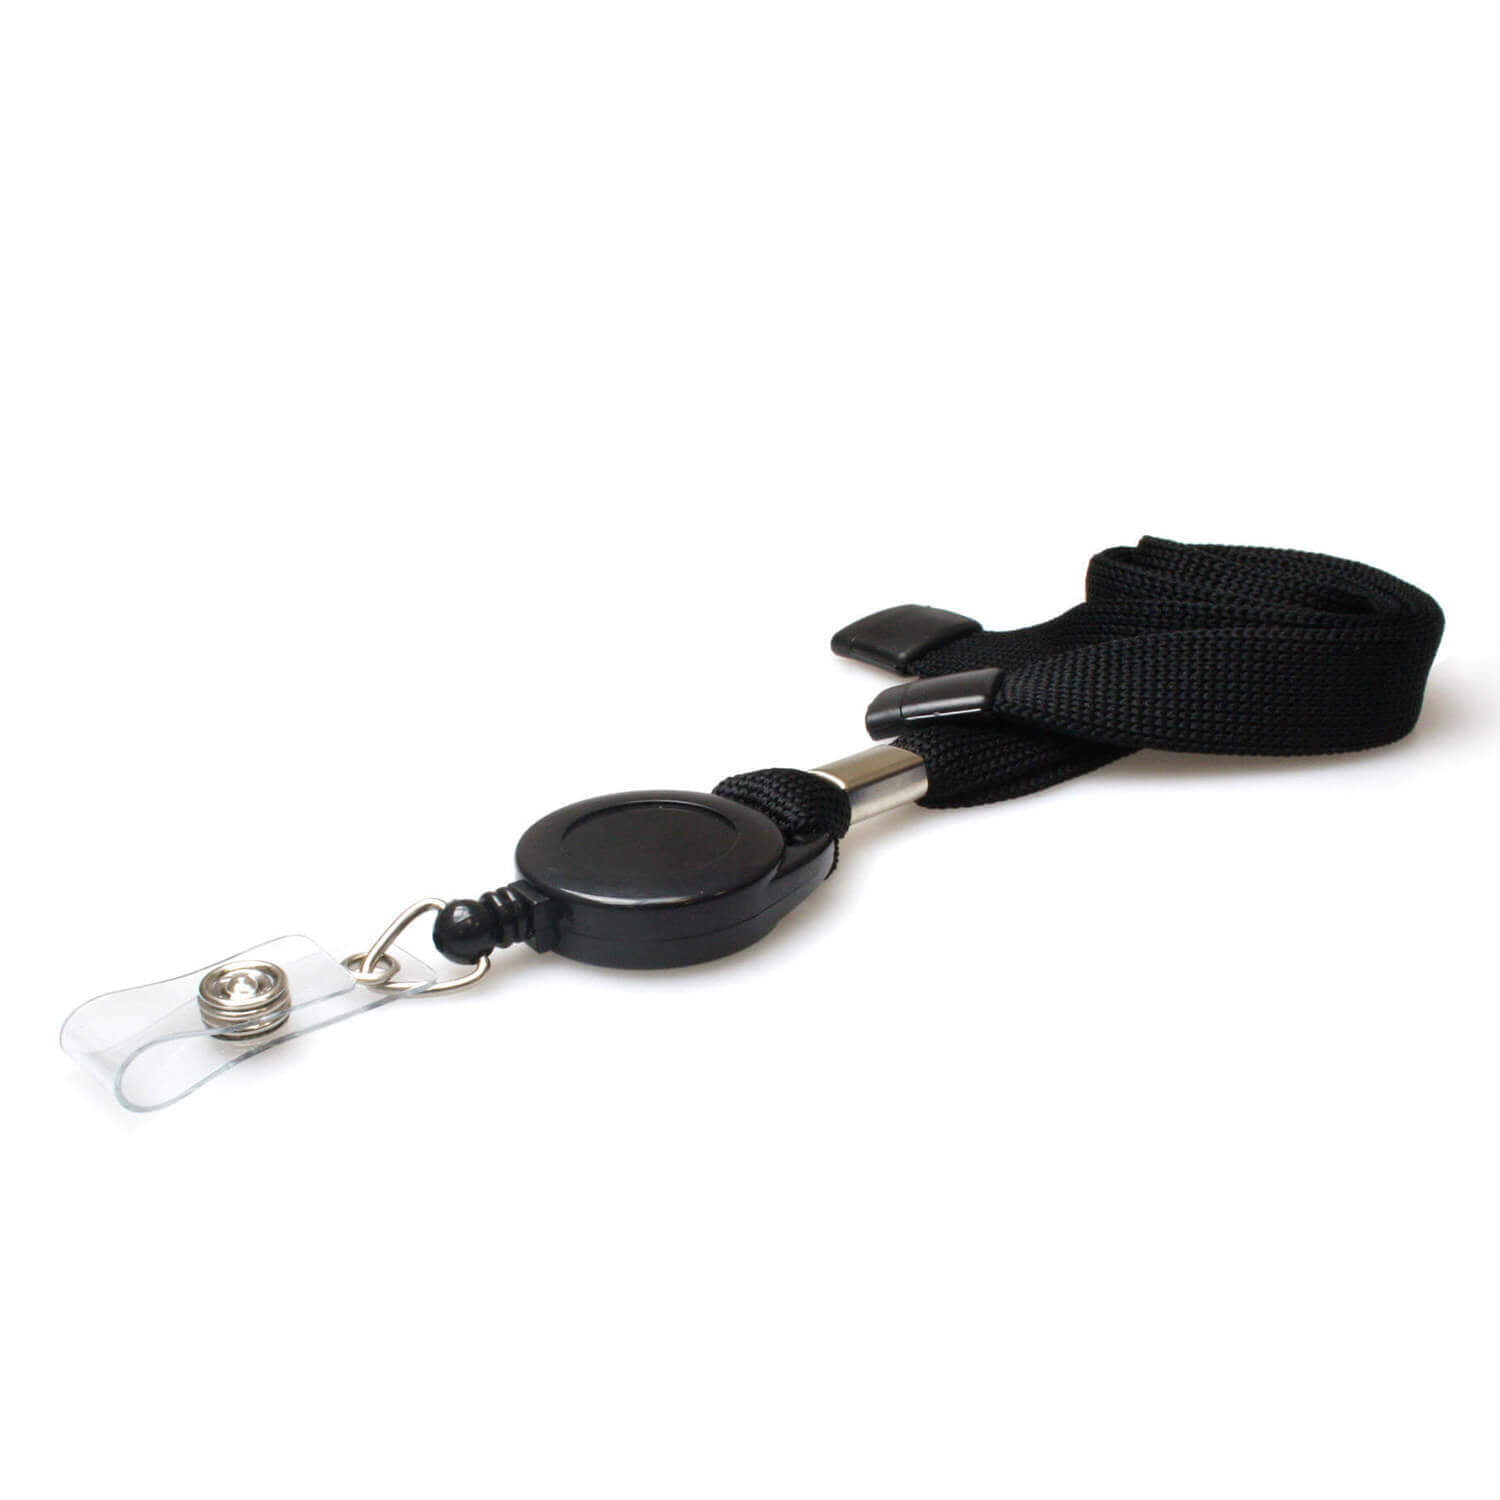 Blue Retractable Lanyard with Badge Reel - The Lanyard Shop